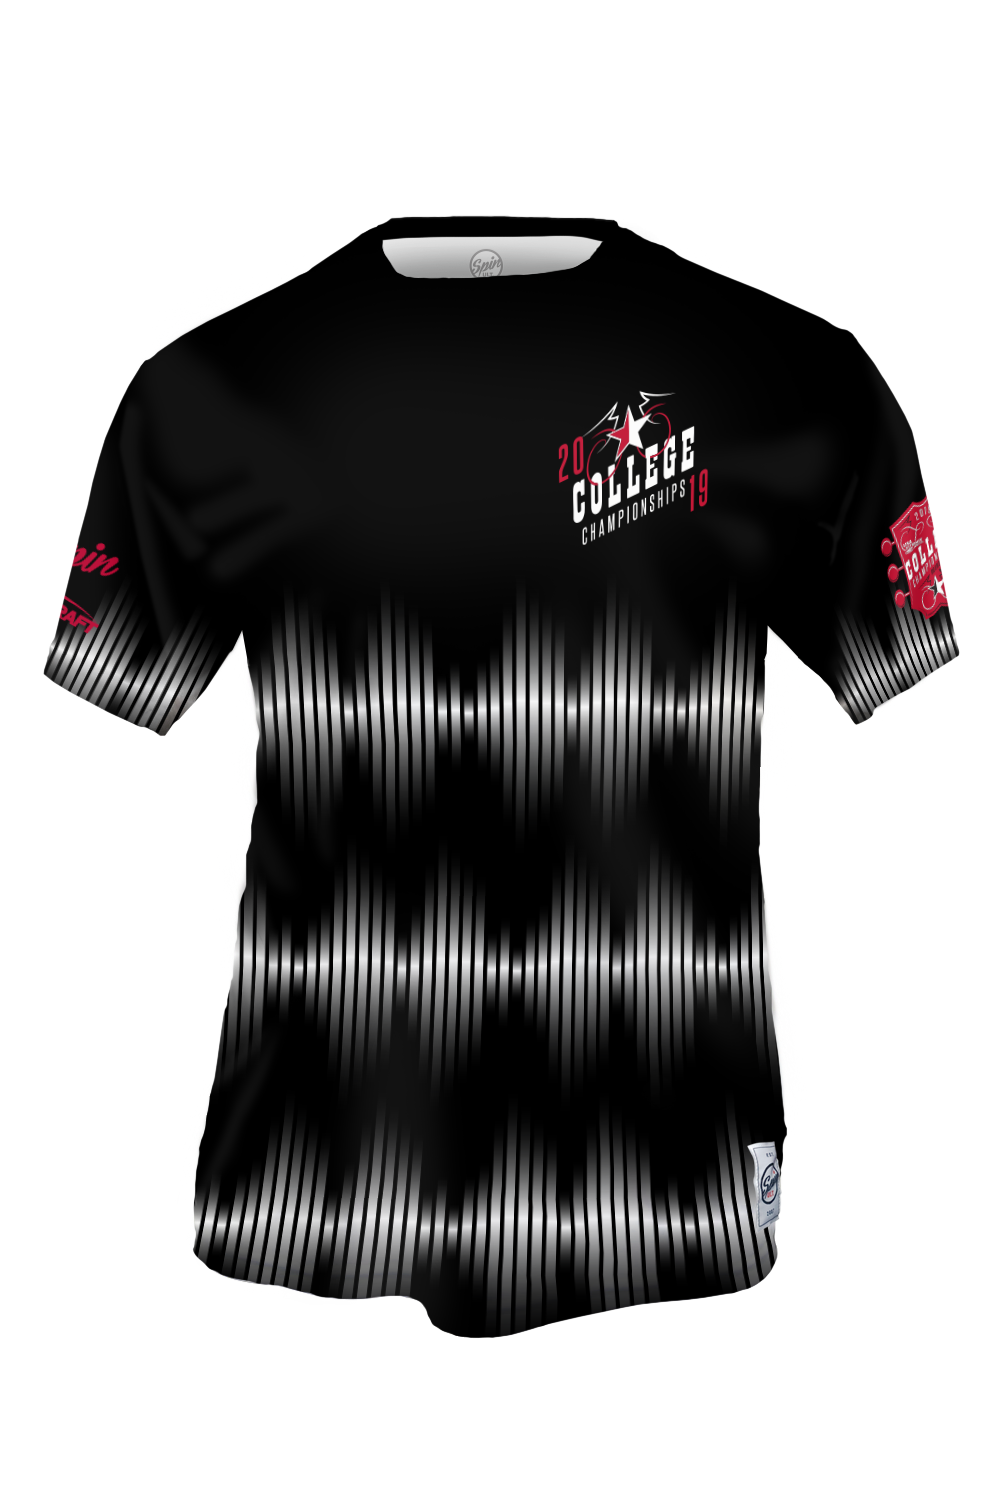 College Championships 2019 Sound Waves Short Sleeve Jersey